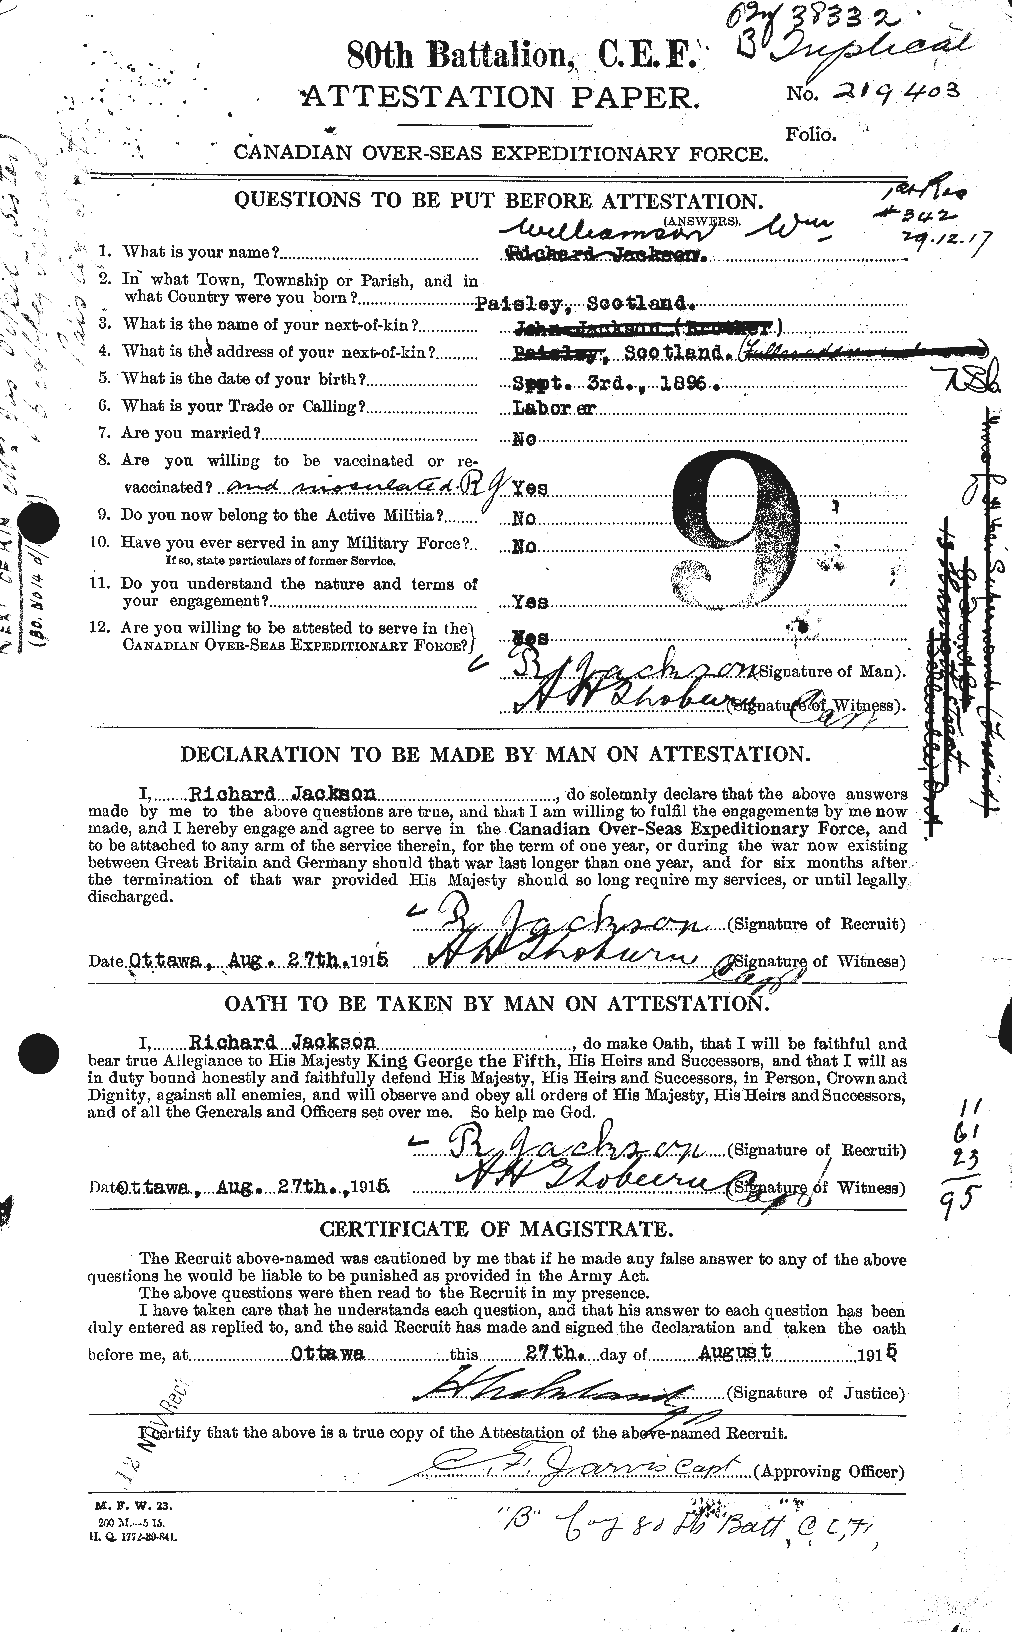 Personnel Records of the First World War - CEF 676296a